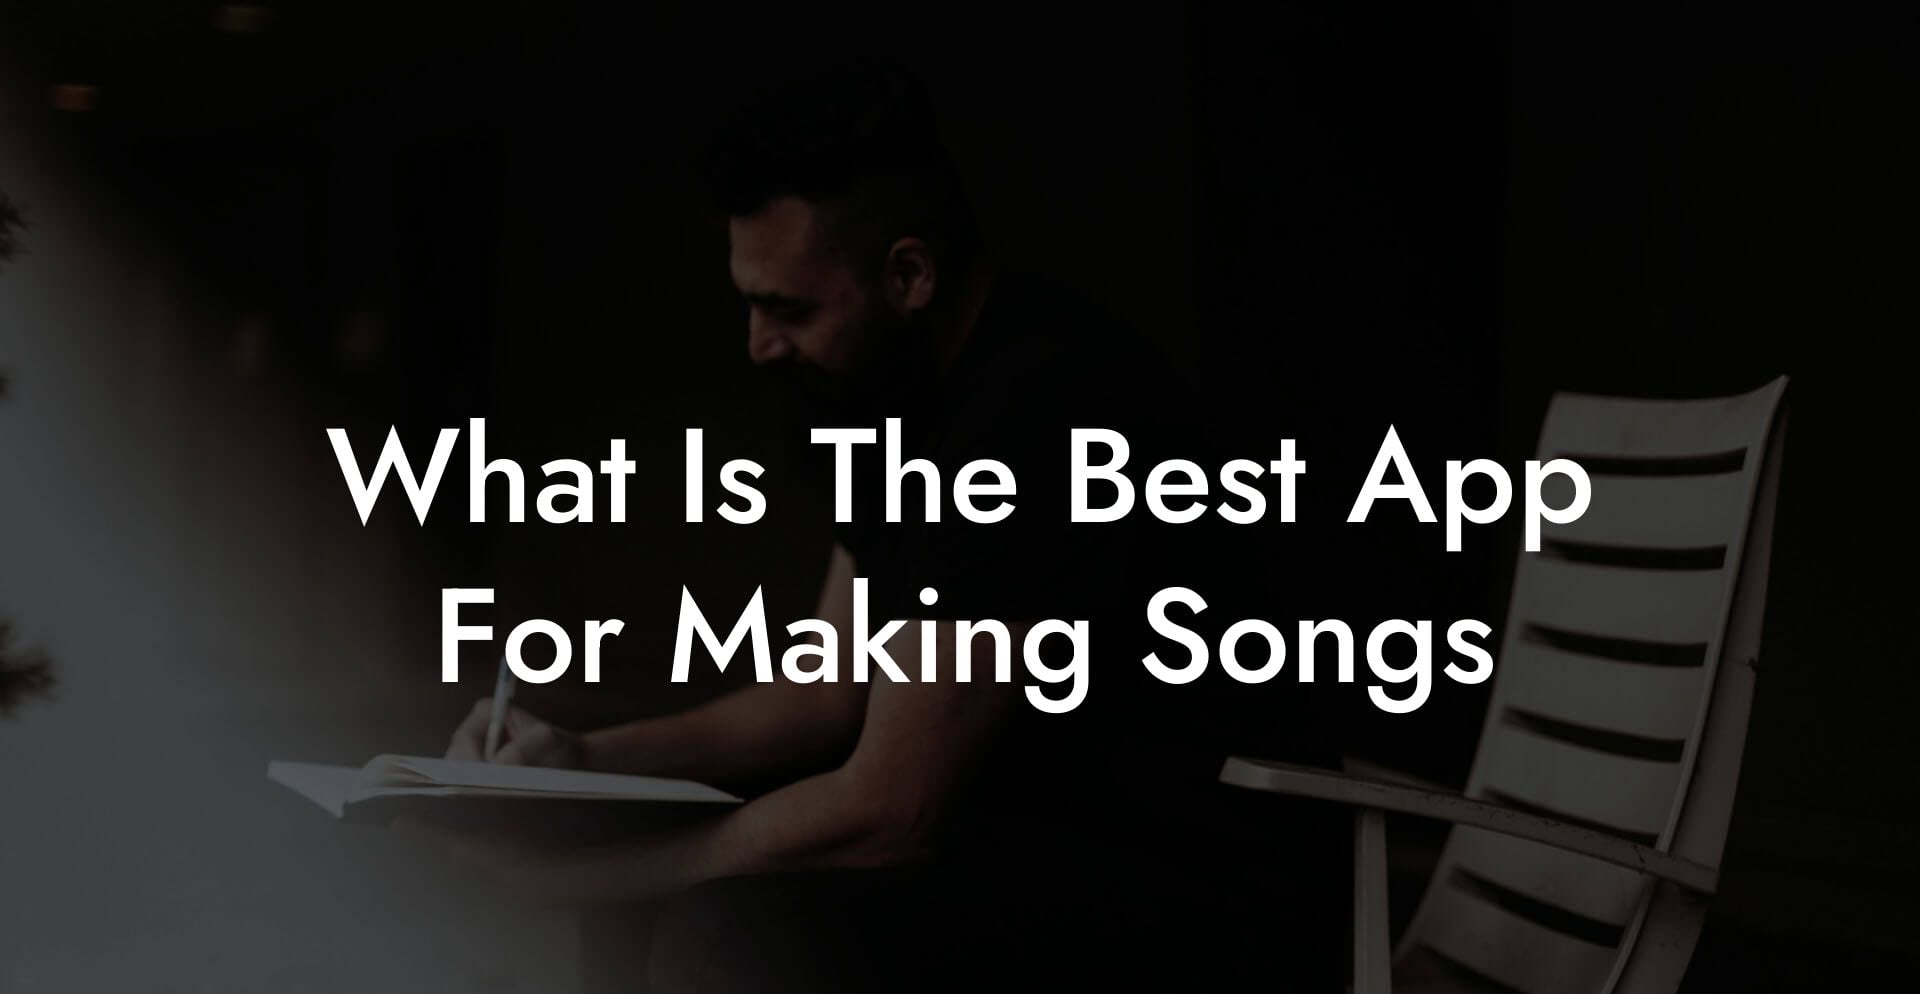 what is the best app for making songs lyric assistant